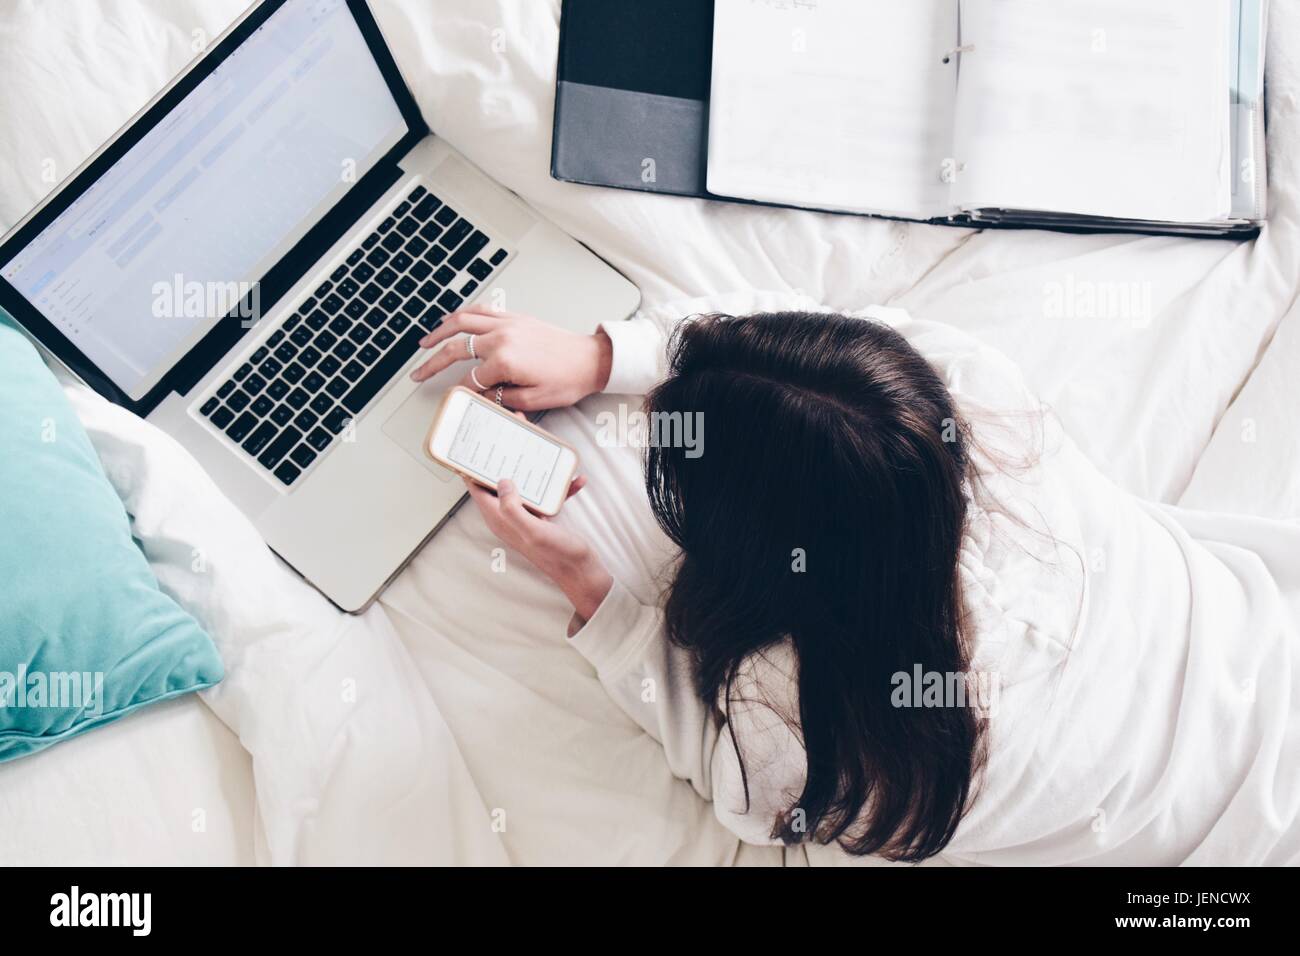 Teenage girl lying in bed using her laptop and mobile phone Stock Photo